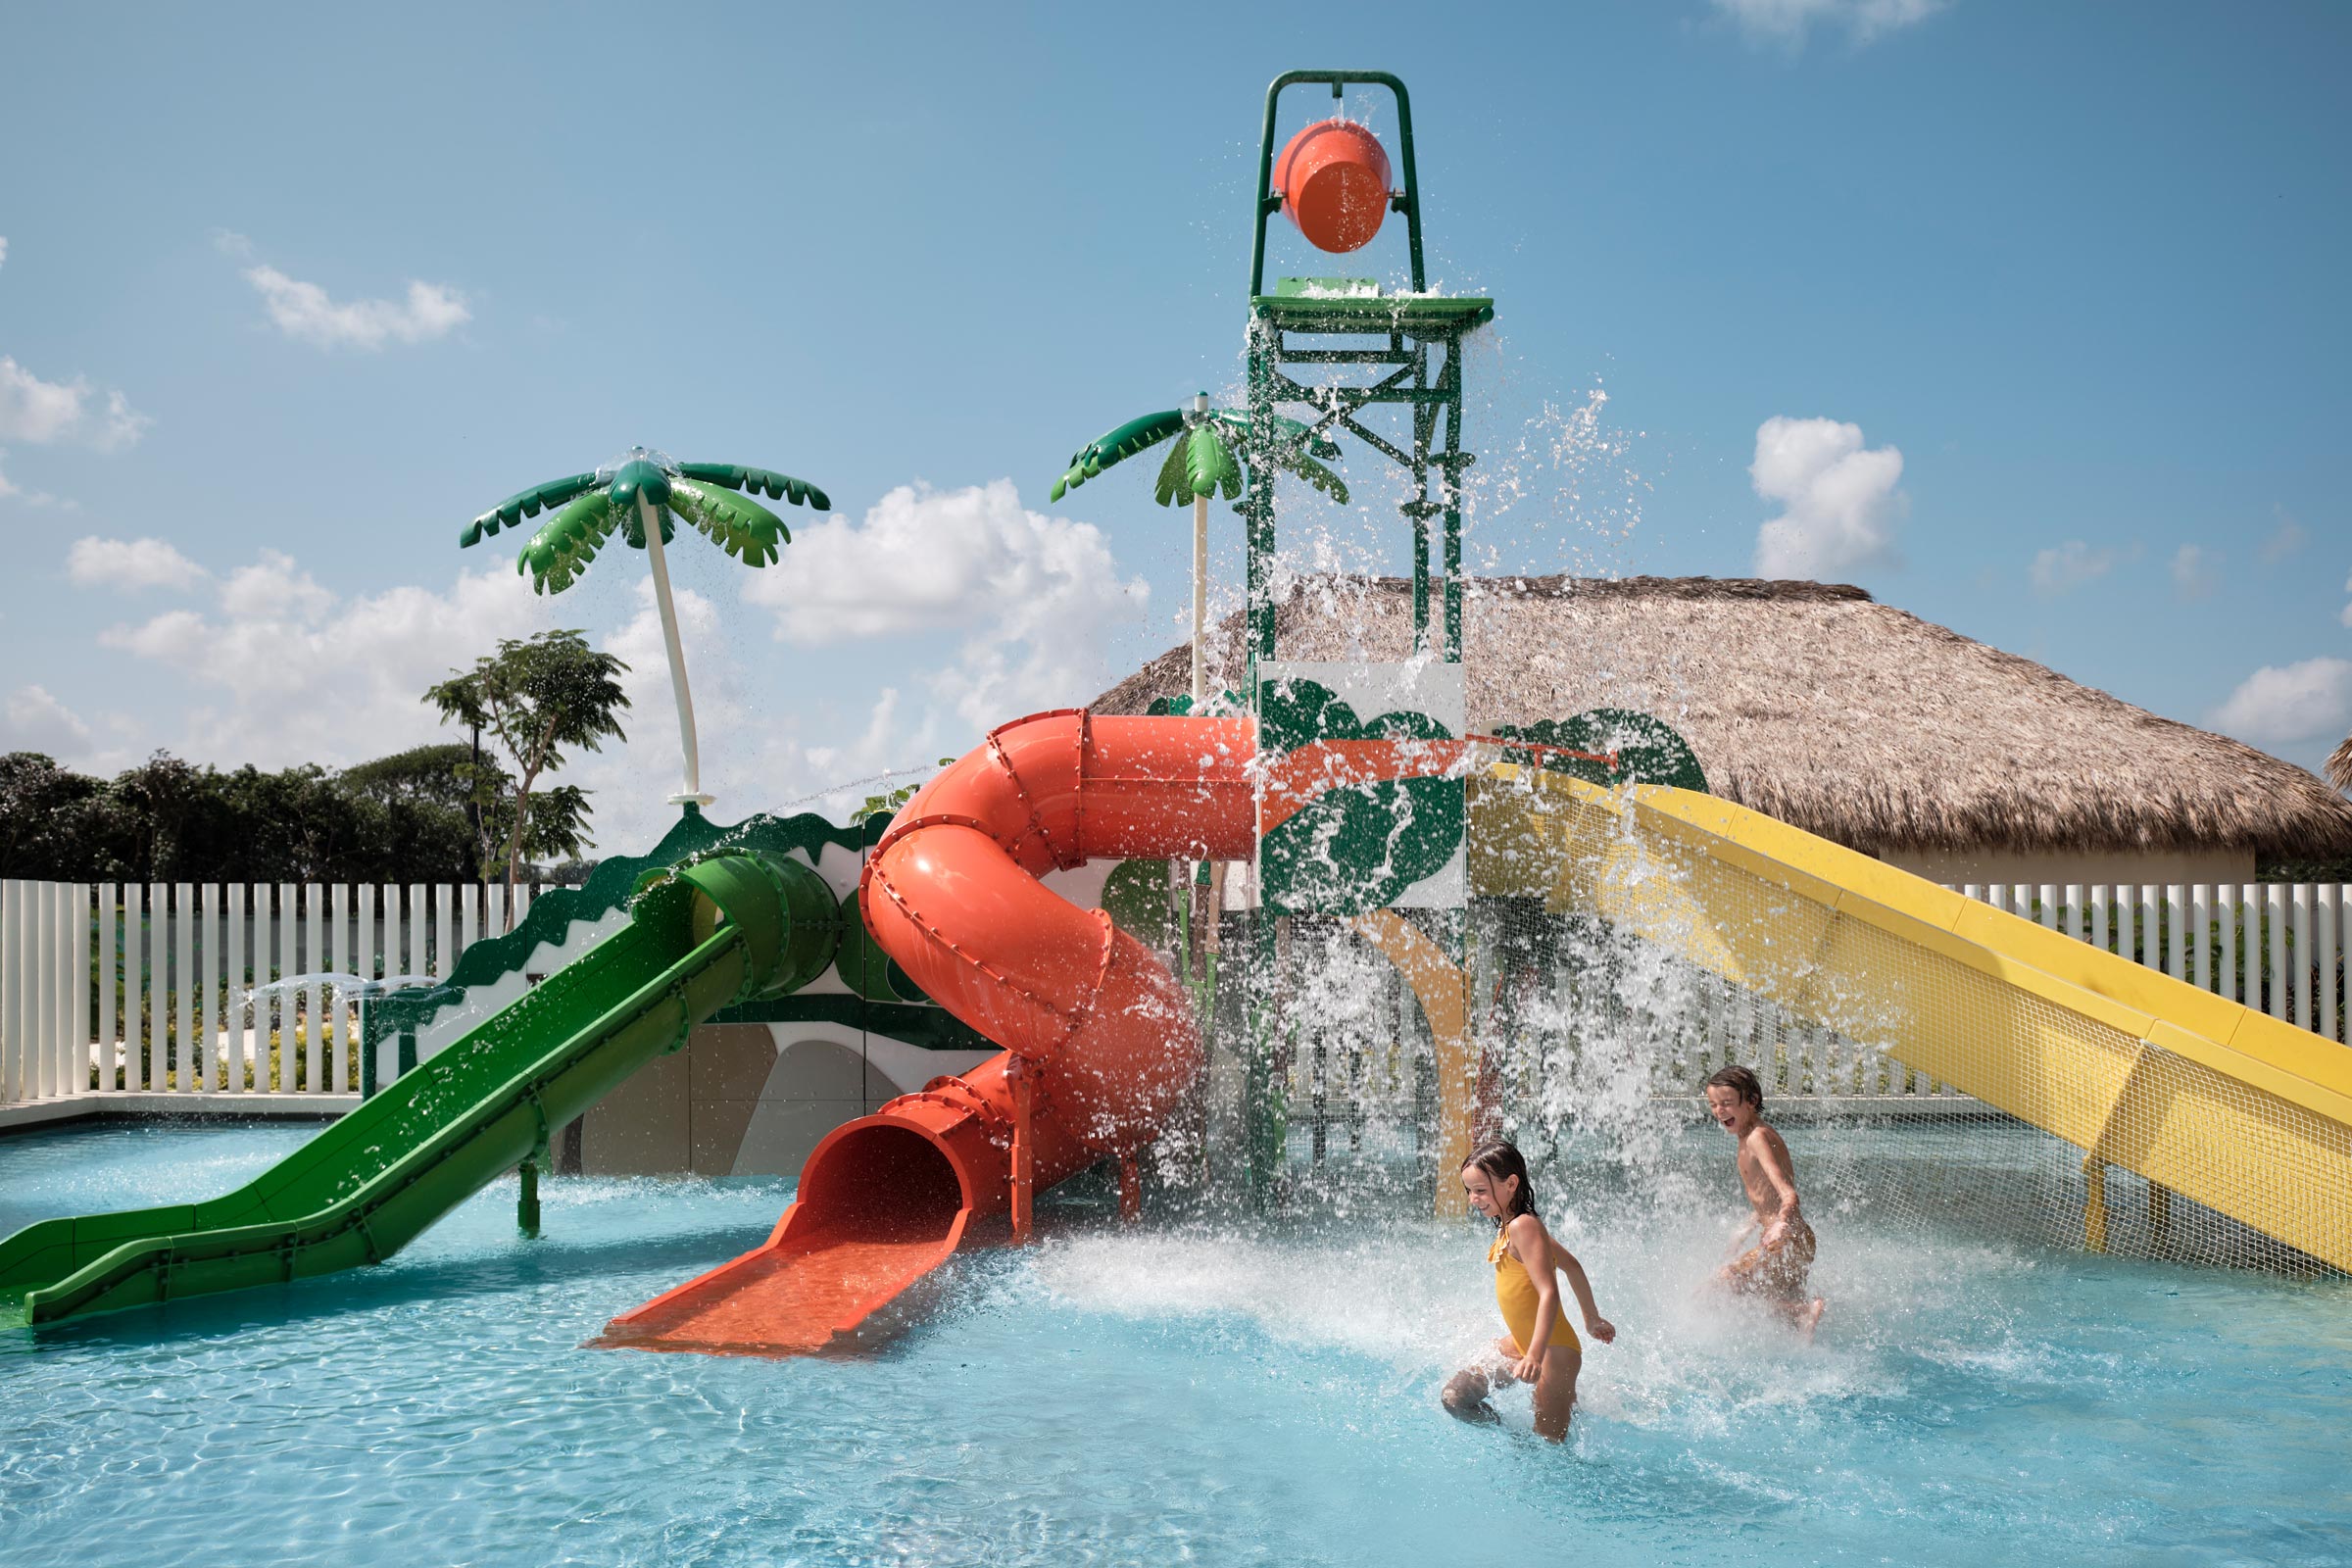 Make Your Tropical Vacation Kid Friendly so Everyone Can Enjoy!